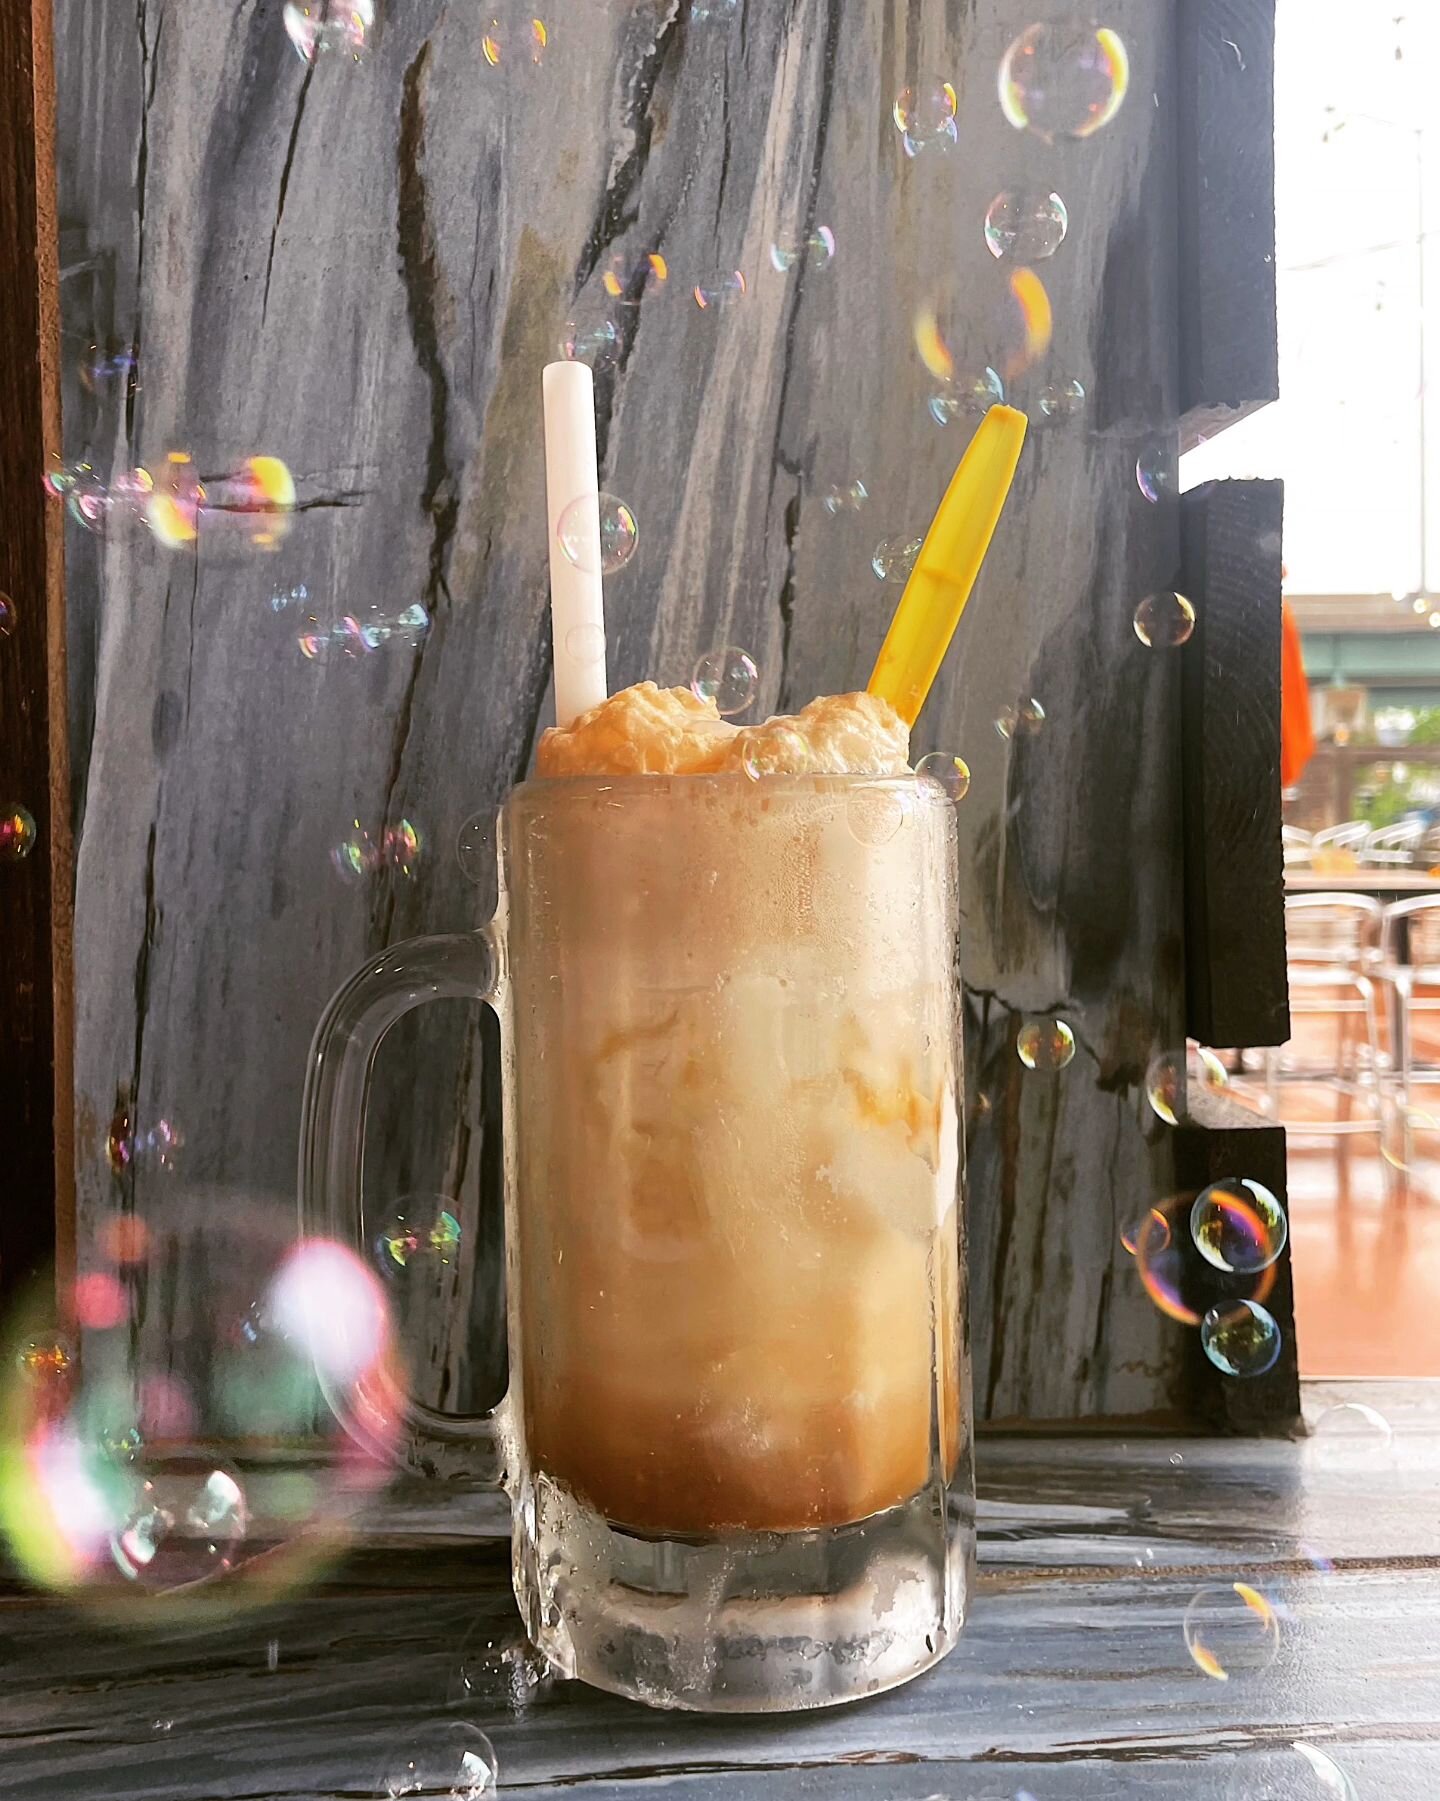 🌞I know it's a gloomy one today but the rest of the week is looking to be beautiful weather! 🌞

This week's featured float is a play on Butter Beer. 
@dananddebbiescreamery Bourbon caramel ice cream, kahl&uacute;a, butterschnaps, and @stubbornsoda 